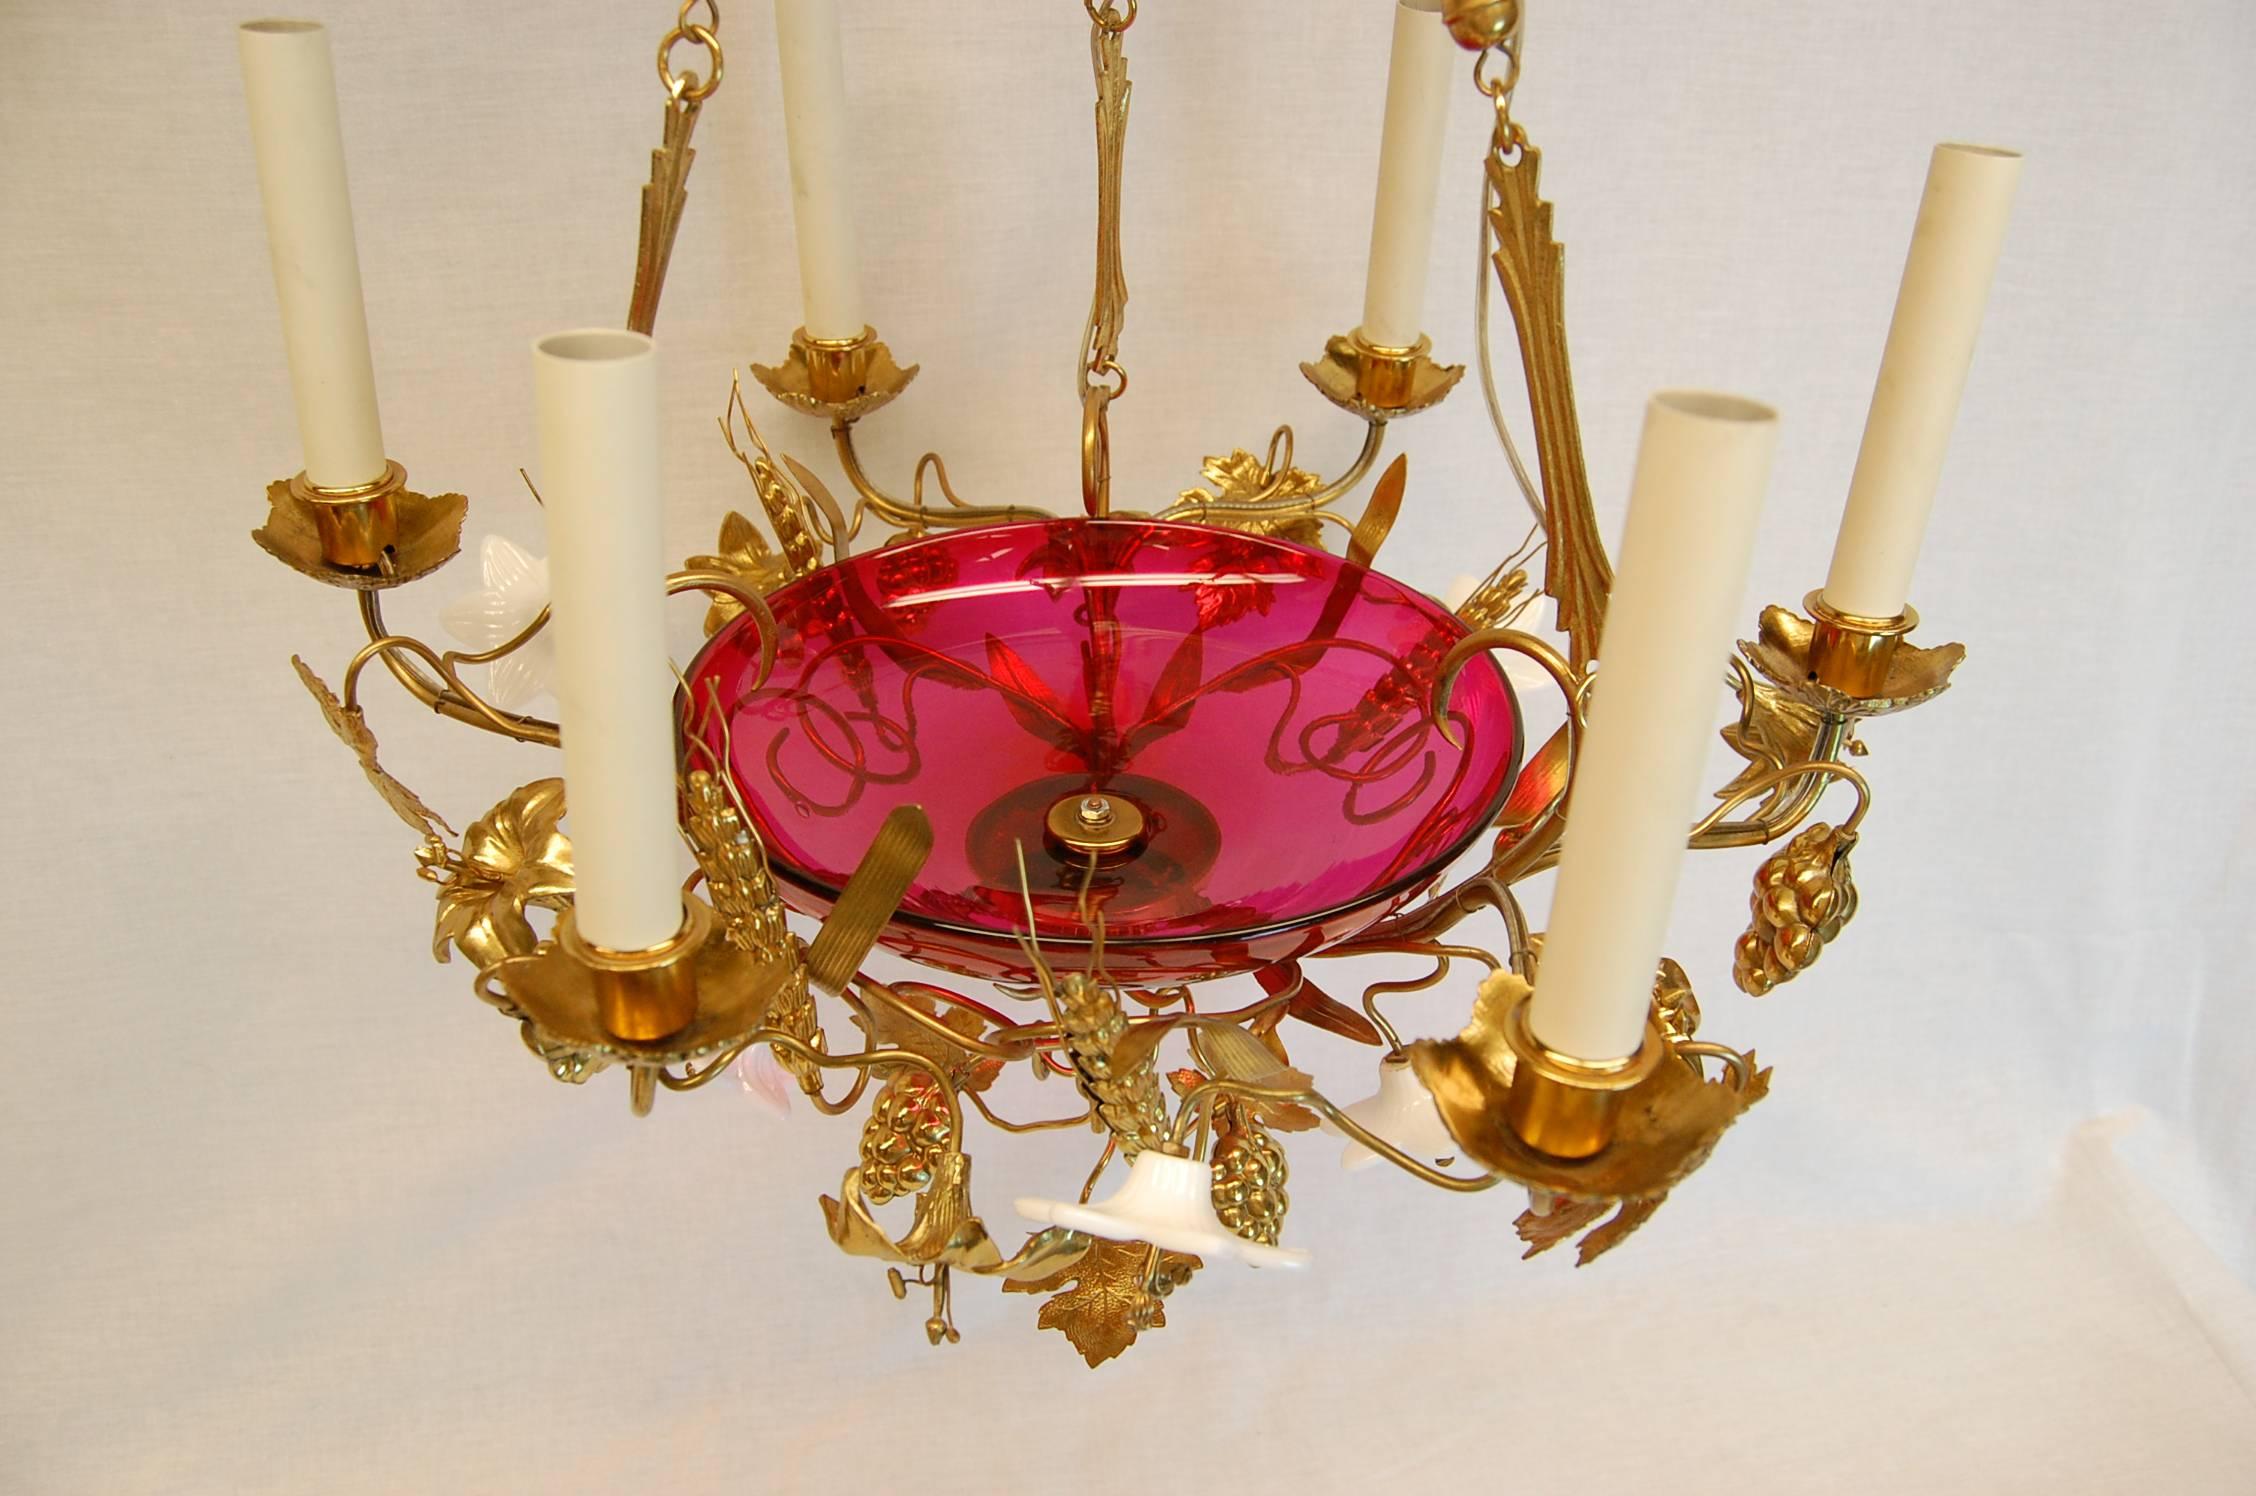 French Chandelier w/ Glass Lilies & Stamped Brass Decorations, Mid 19th Century In Excellent Condition For Sale In Pittsburgh, PA